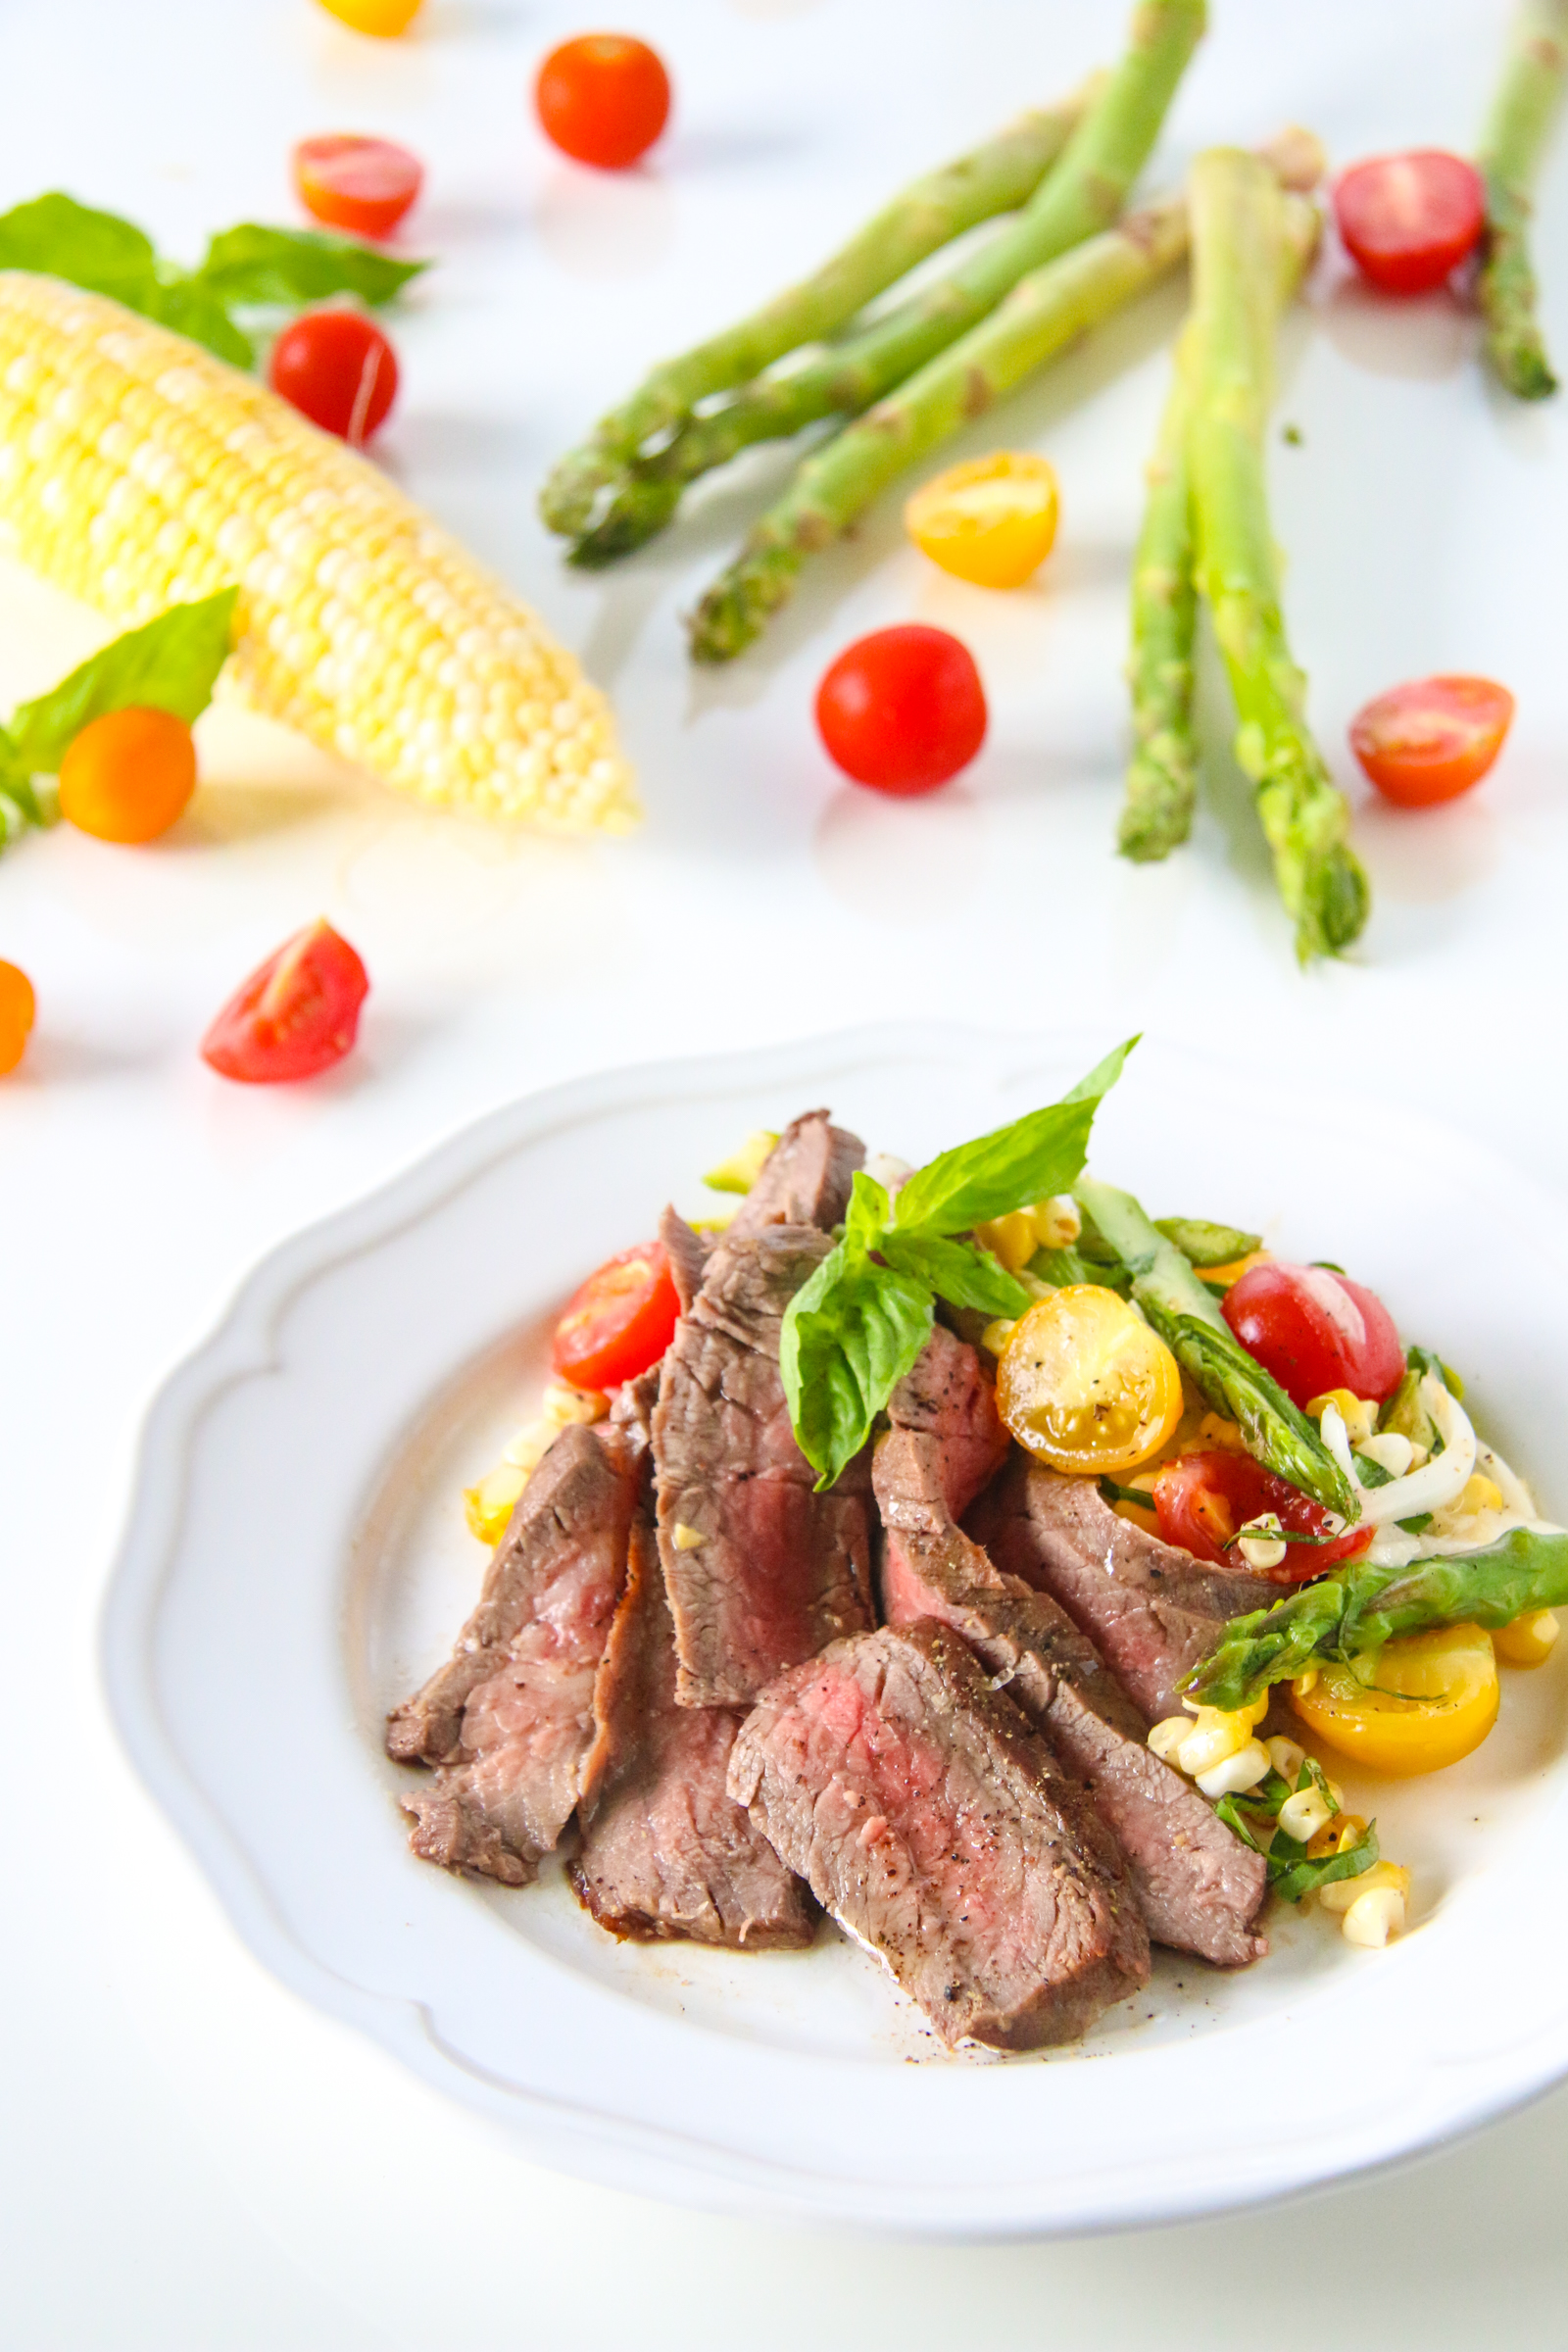 marinated flank steak with corn, asparagus, and tomato salad